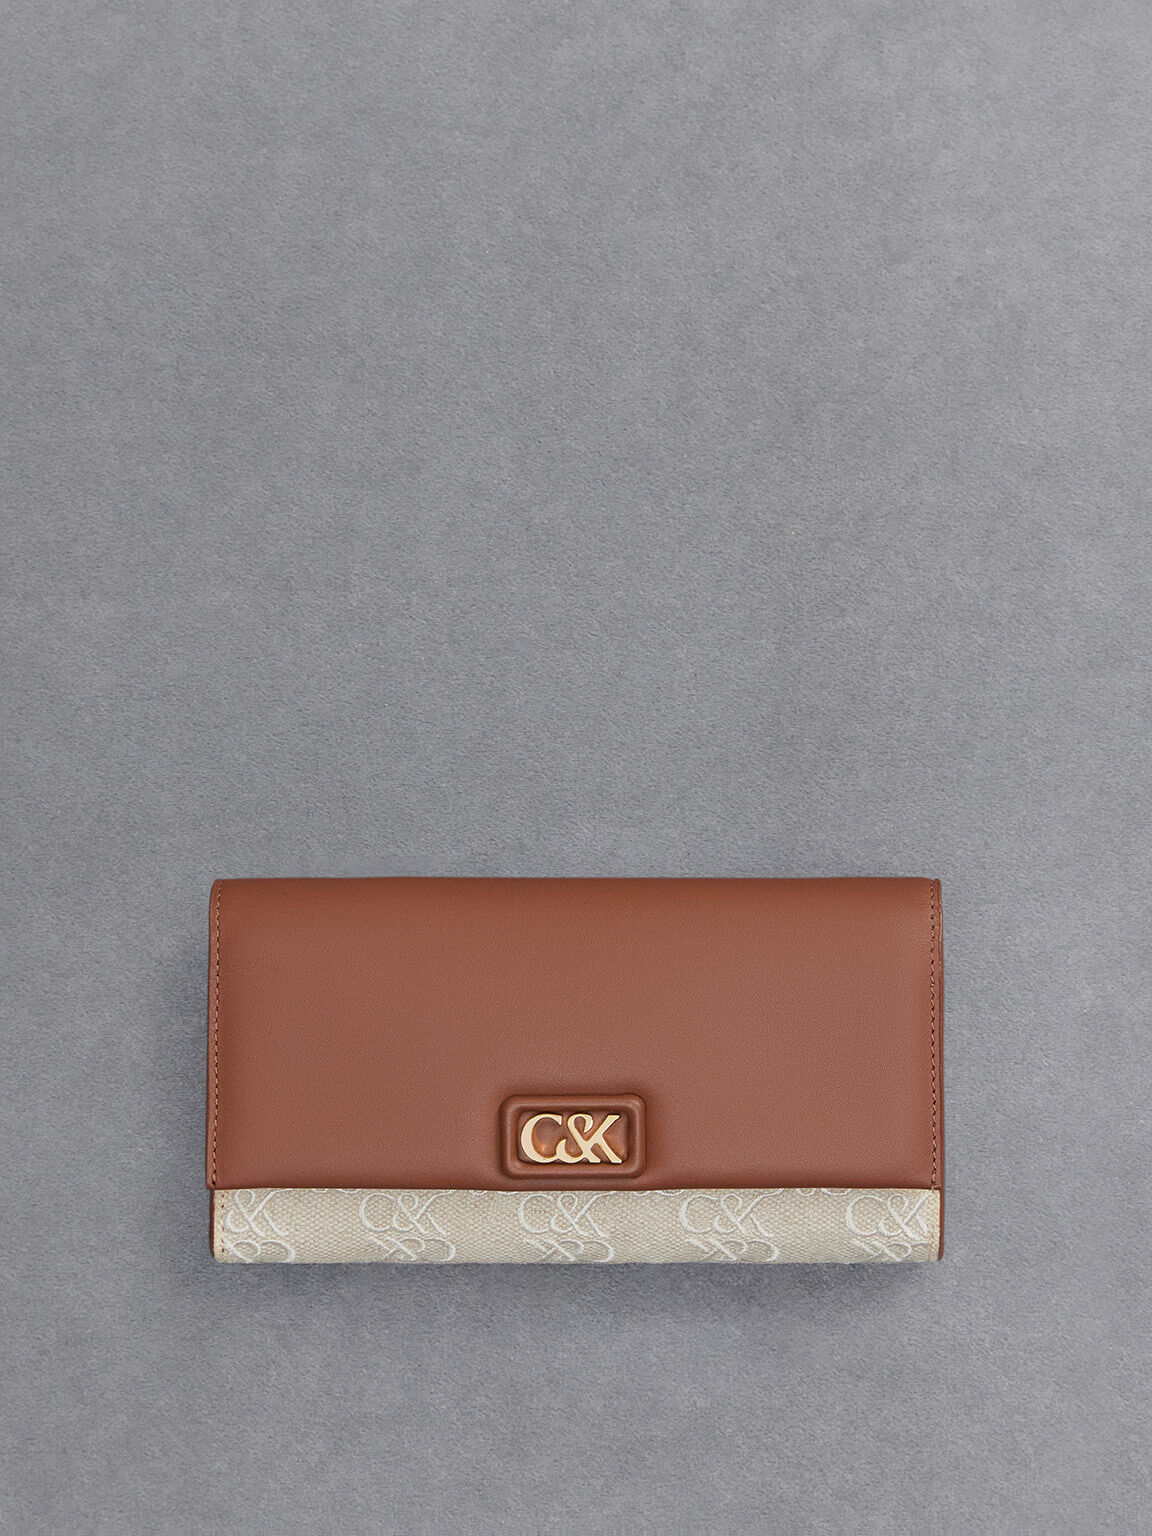 Women's Wallets | Shop Exclusive Styles | CHARLES & KEITH FR